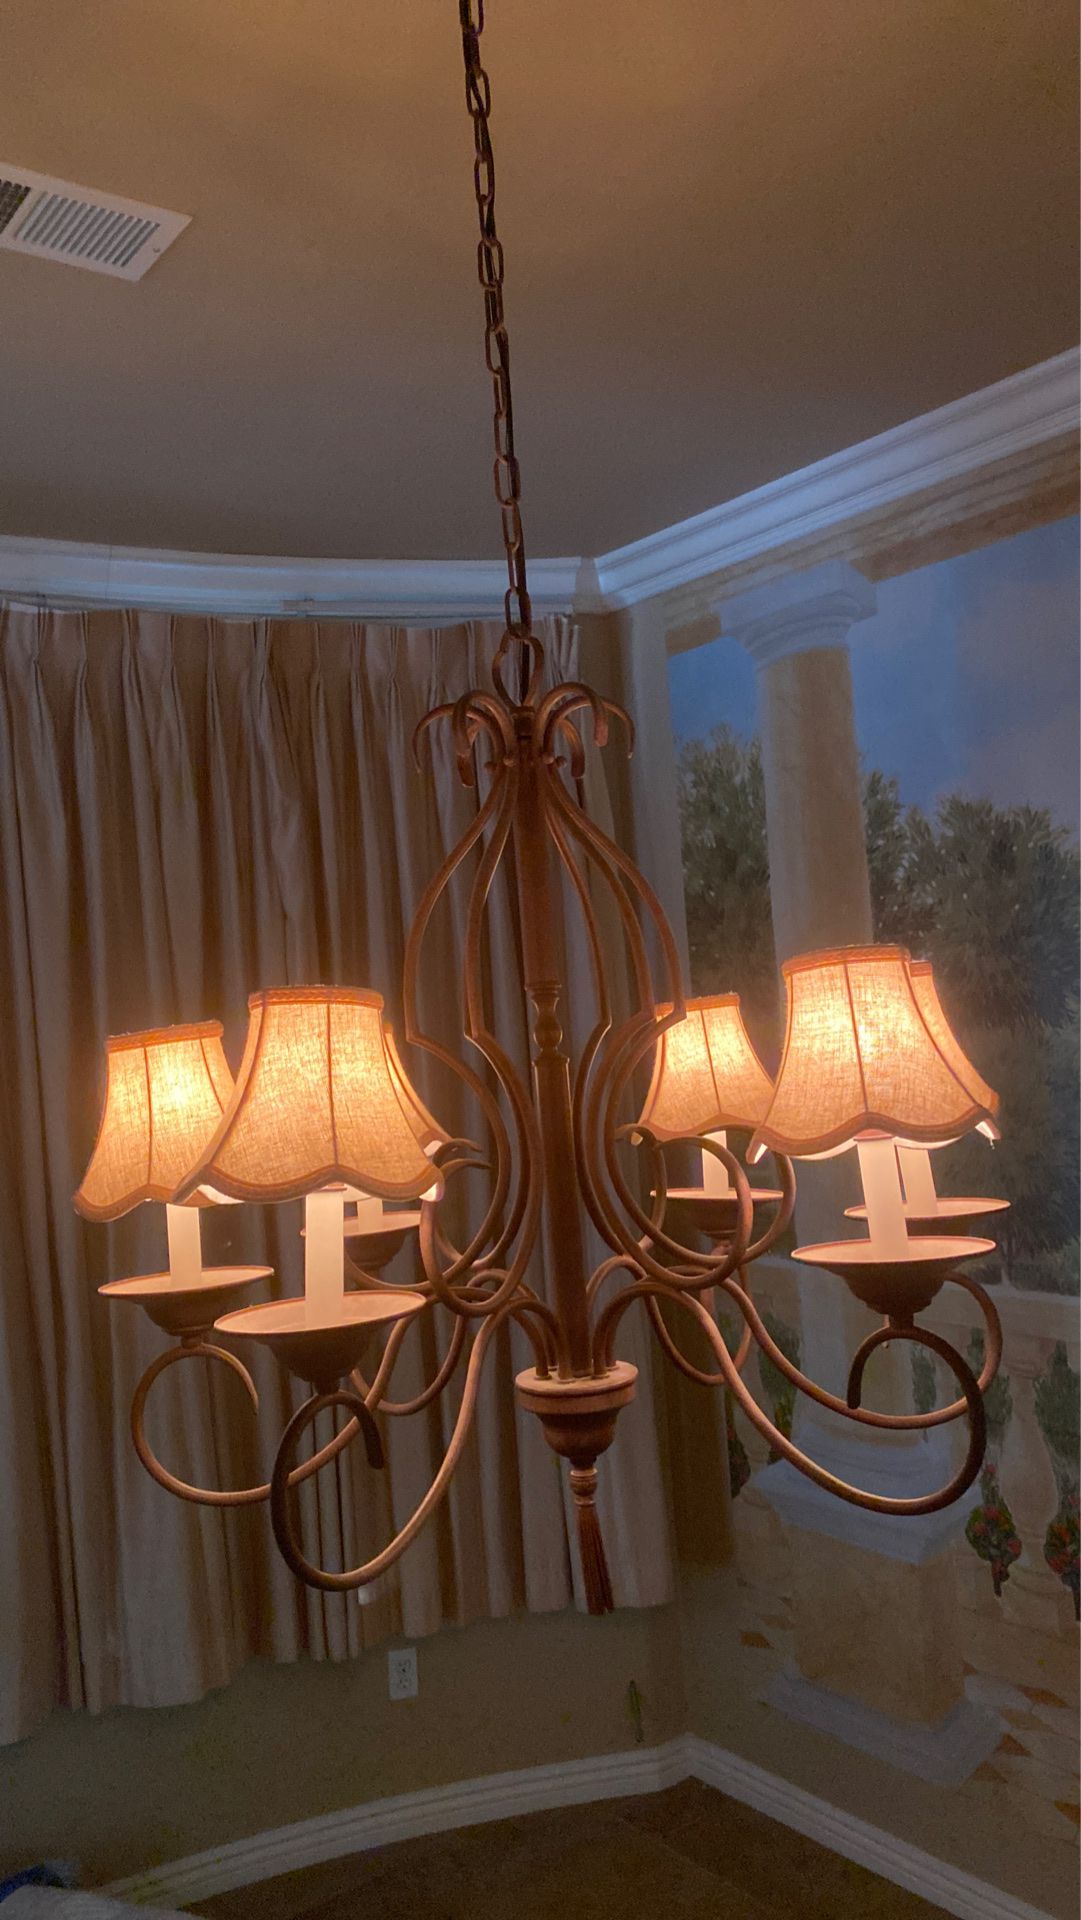 Bronze wrought iron chandelier with shades